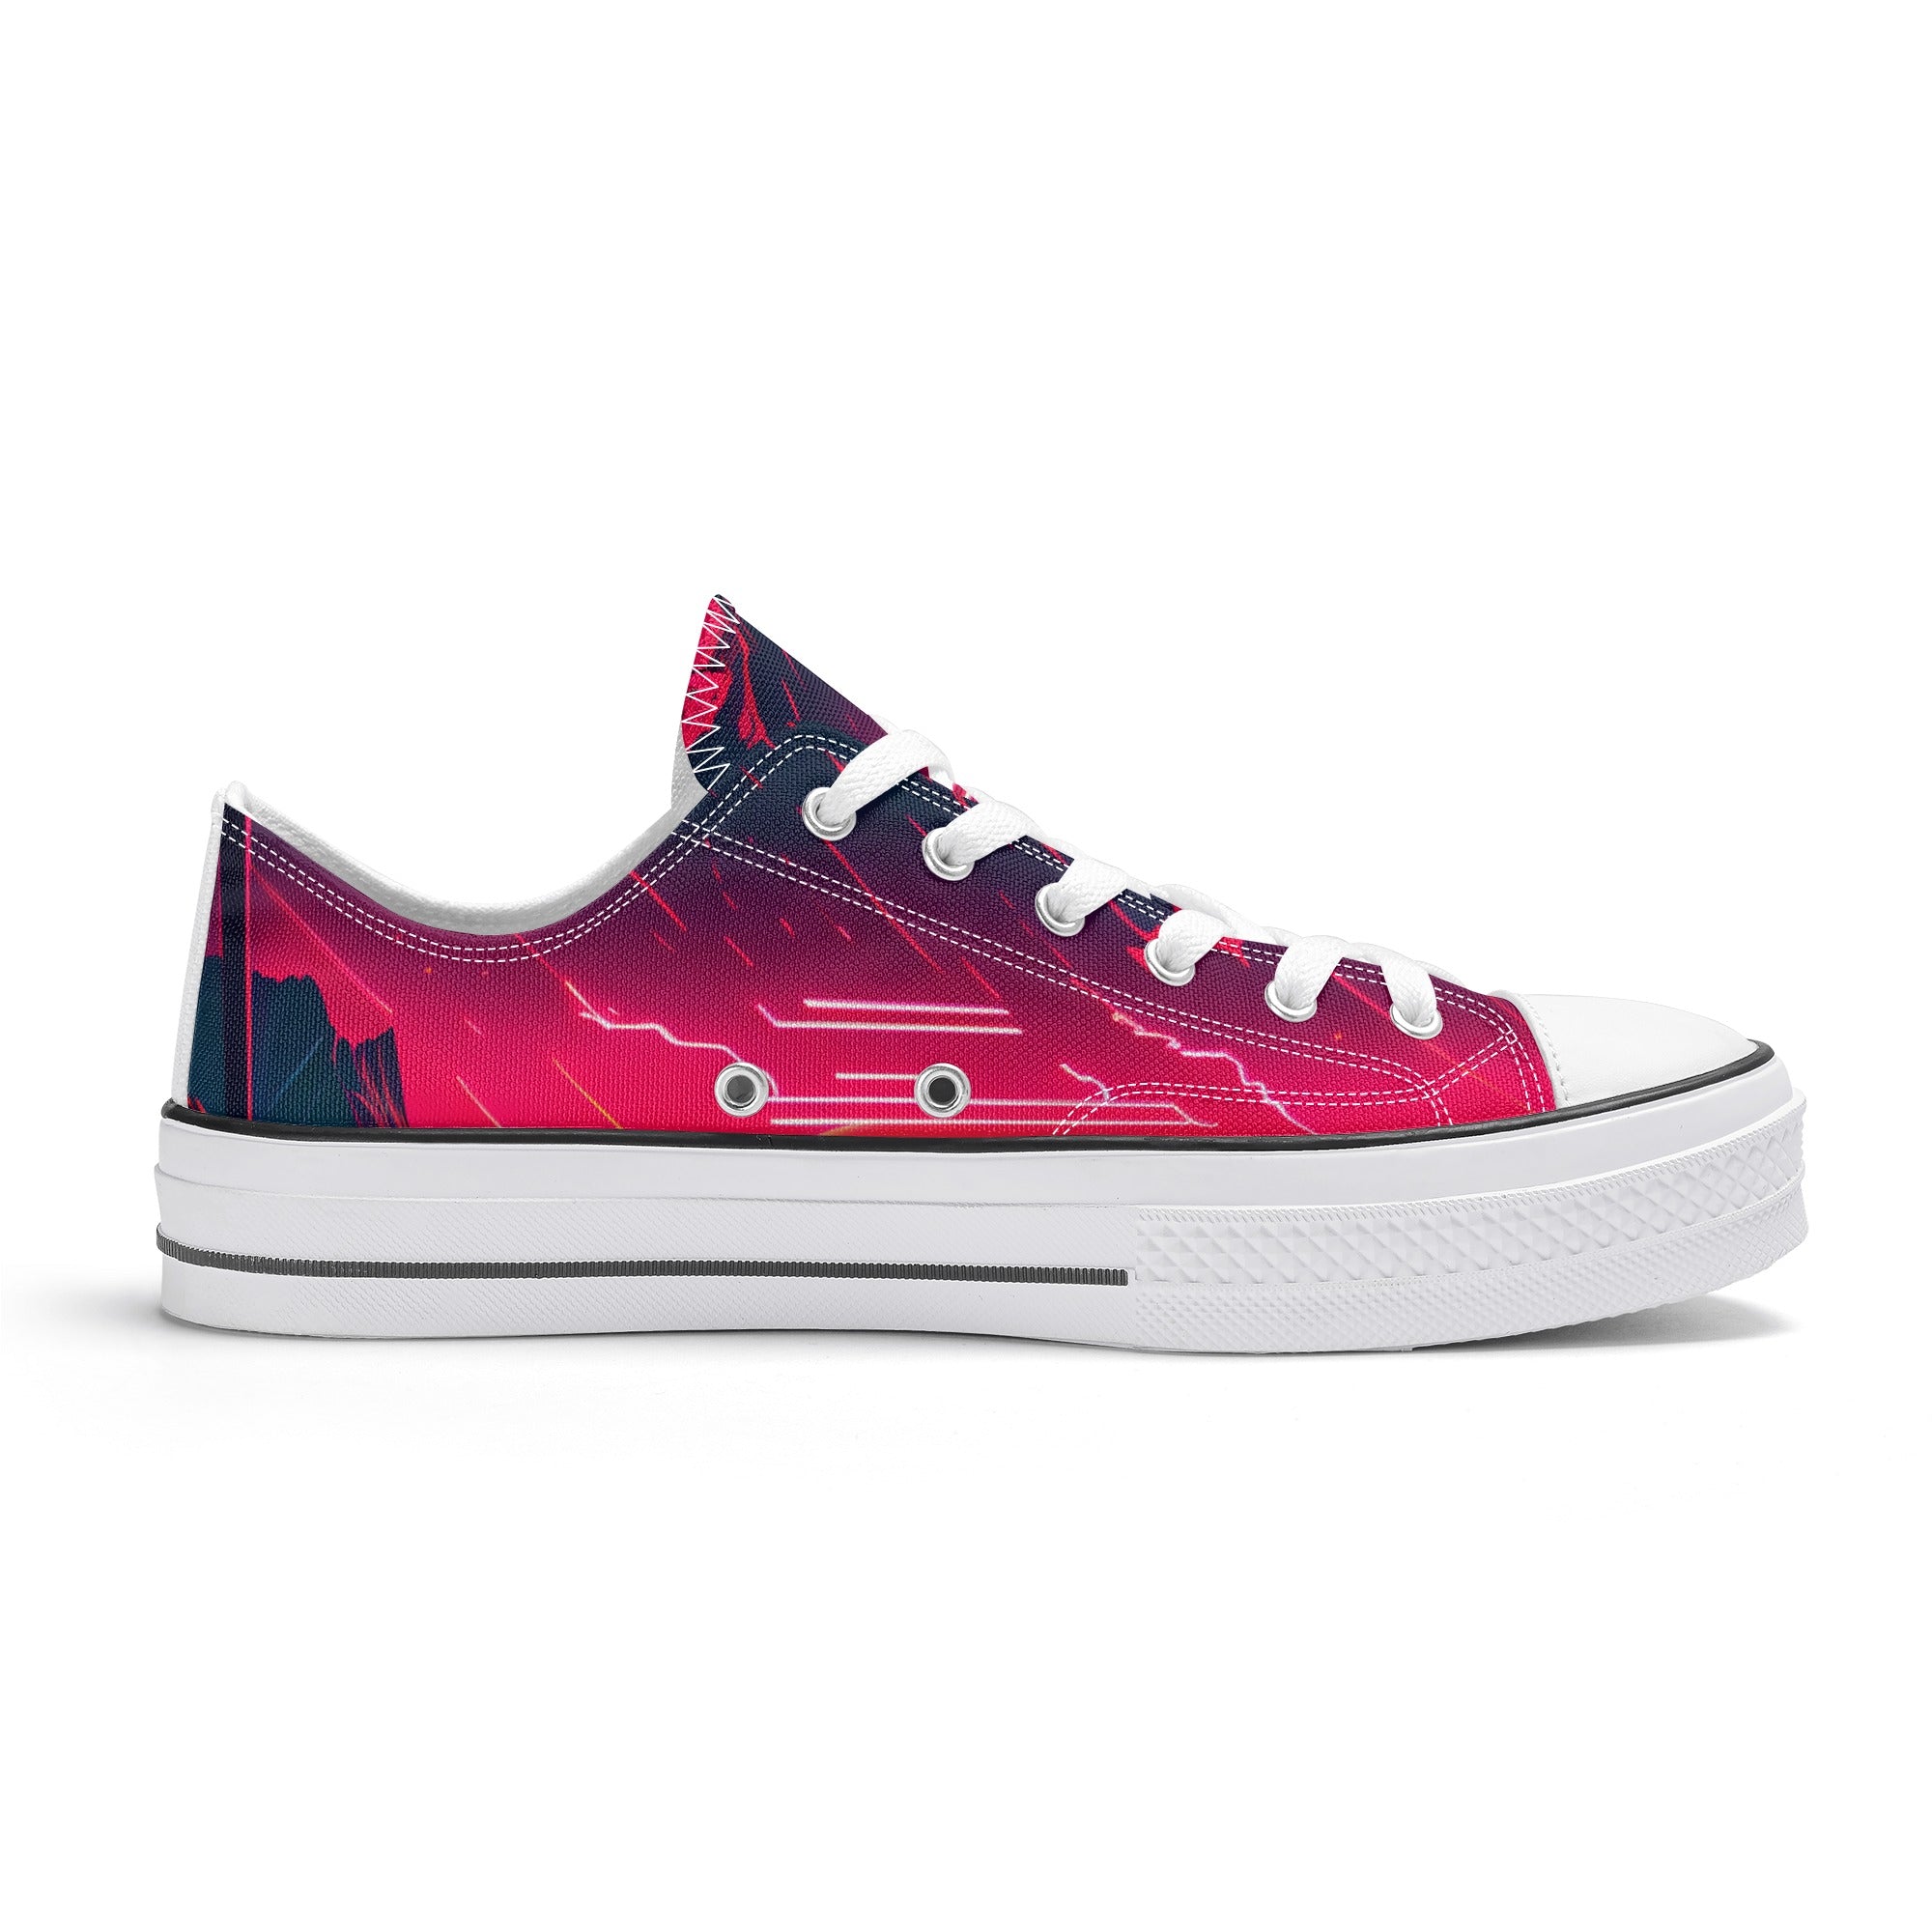 Women's Electric Red Classic